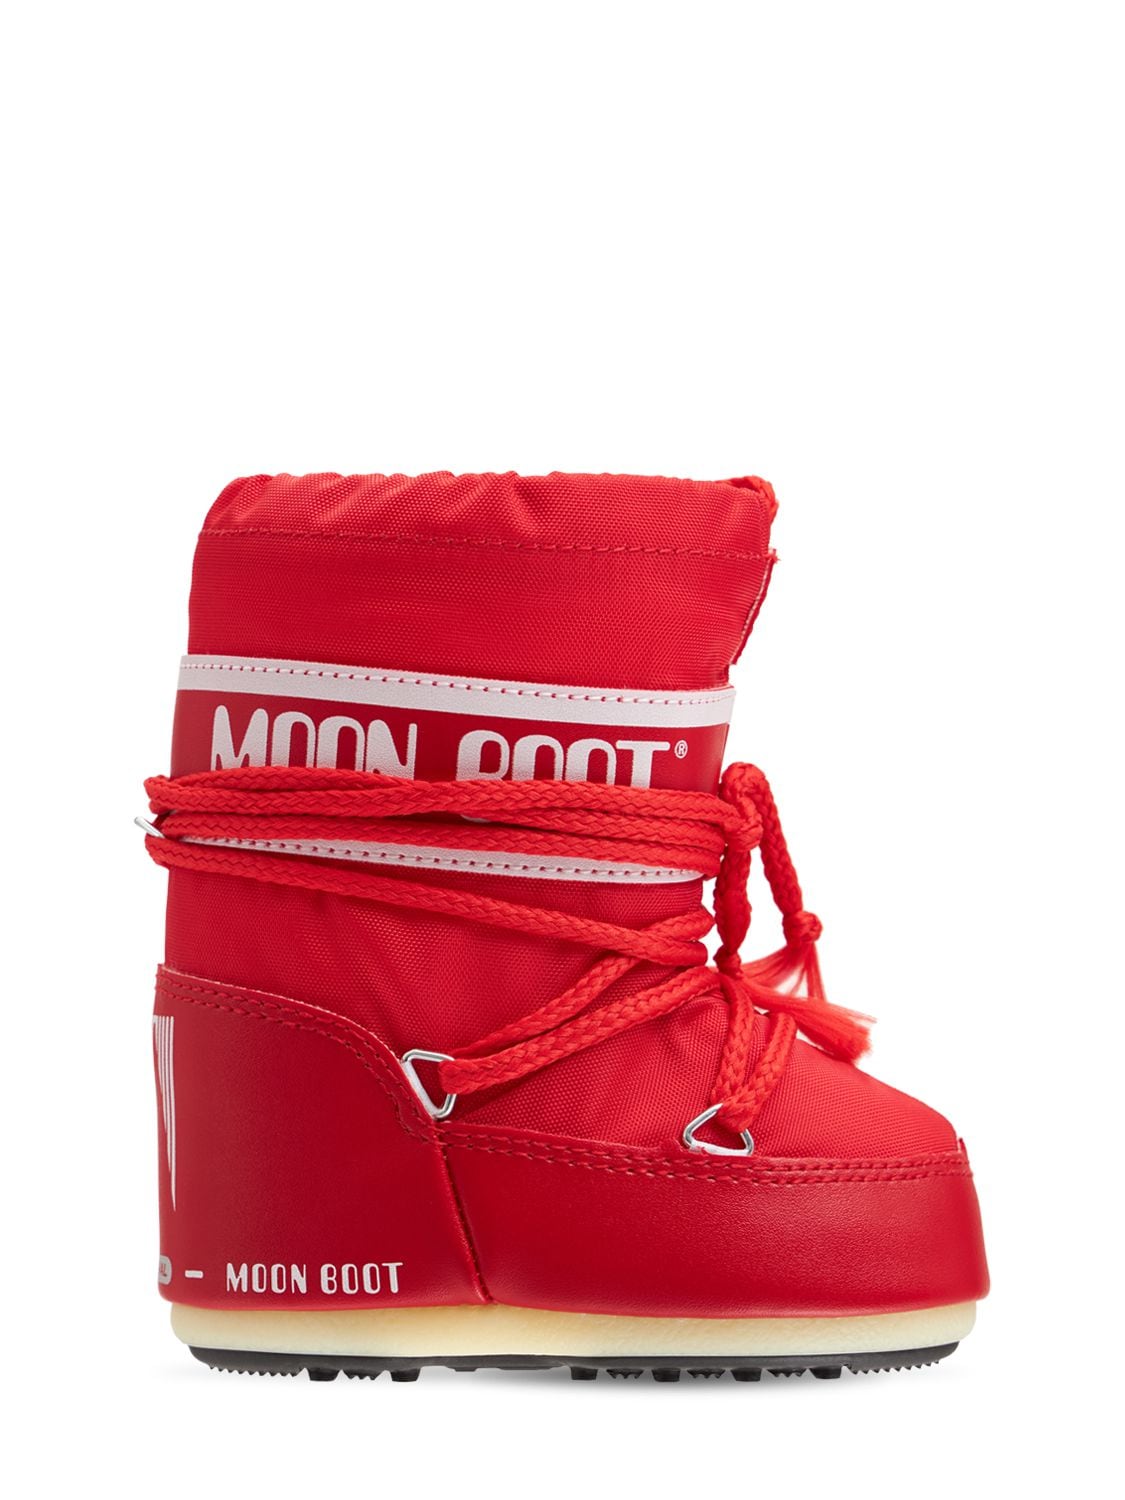 MOON BOOT ICON NYLON ANKLE SNOW BOOTS